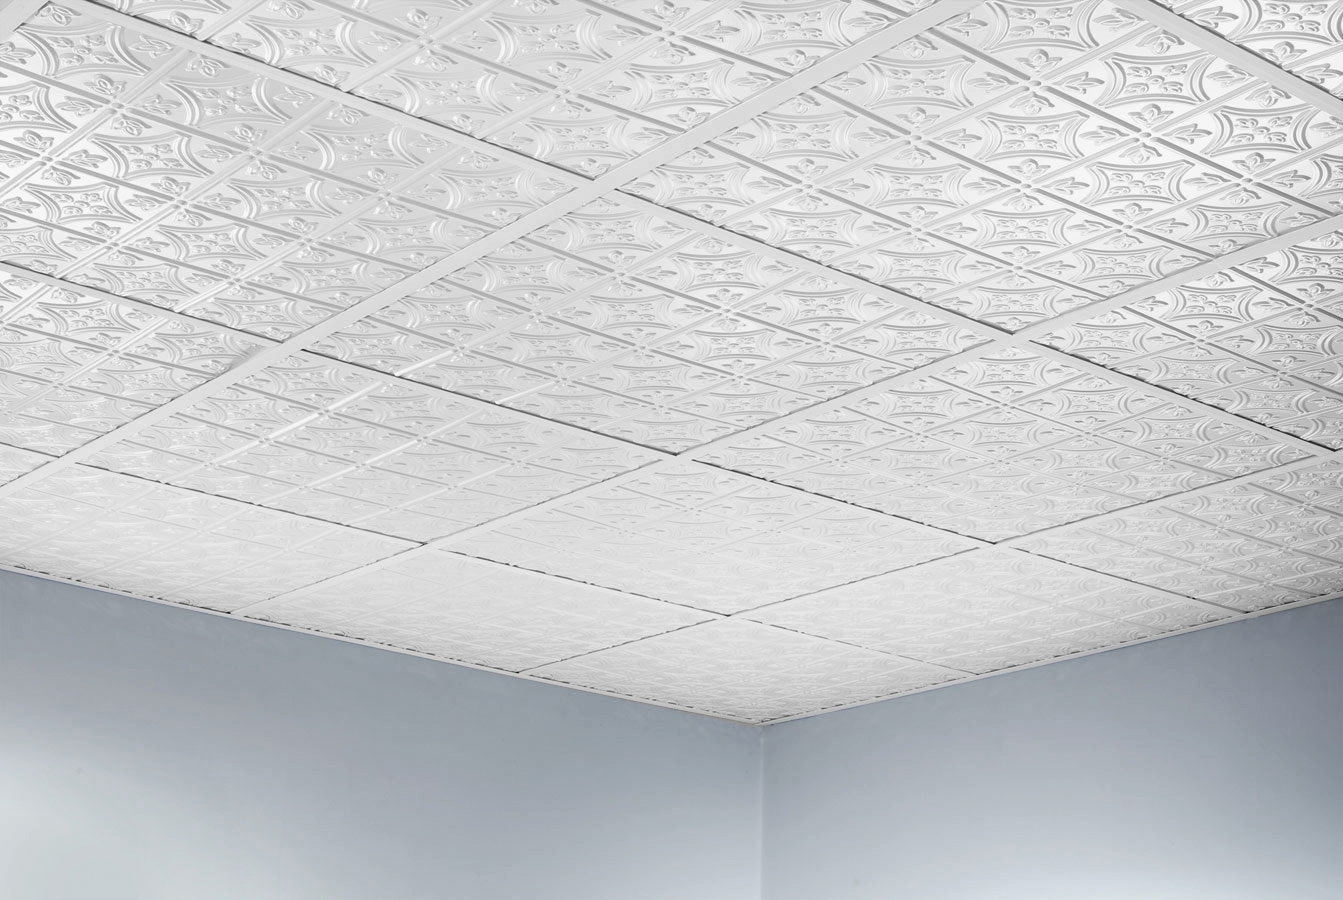 Glue For Armstrong Ceiling Tiles Glue For Armstrong Ceiling Tiles armstrong ceiling tile glue ceilling 1343 X 900